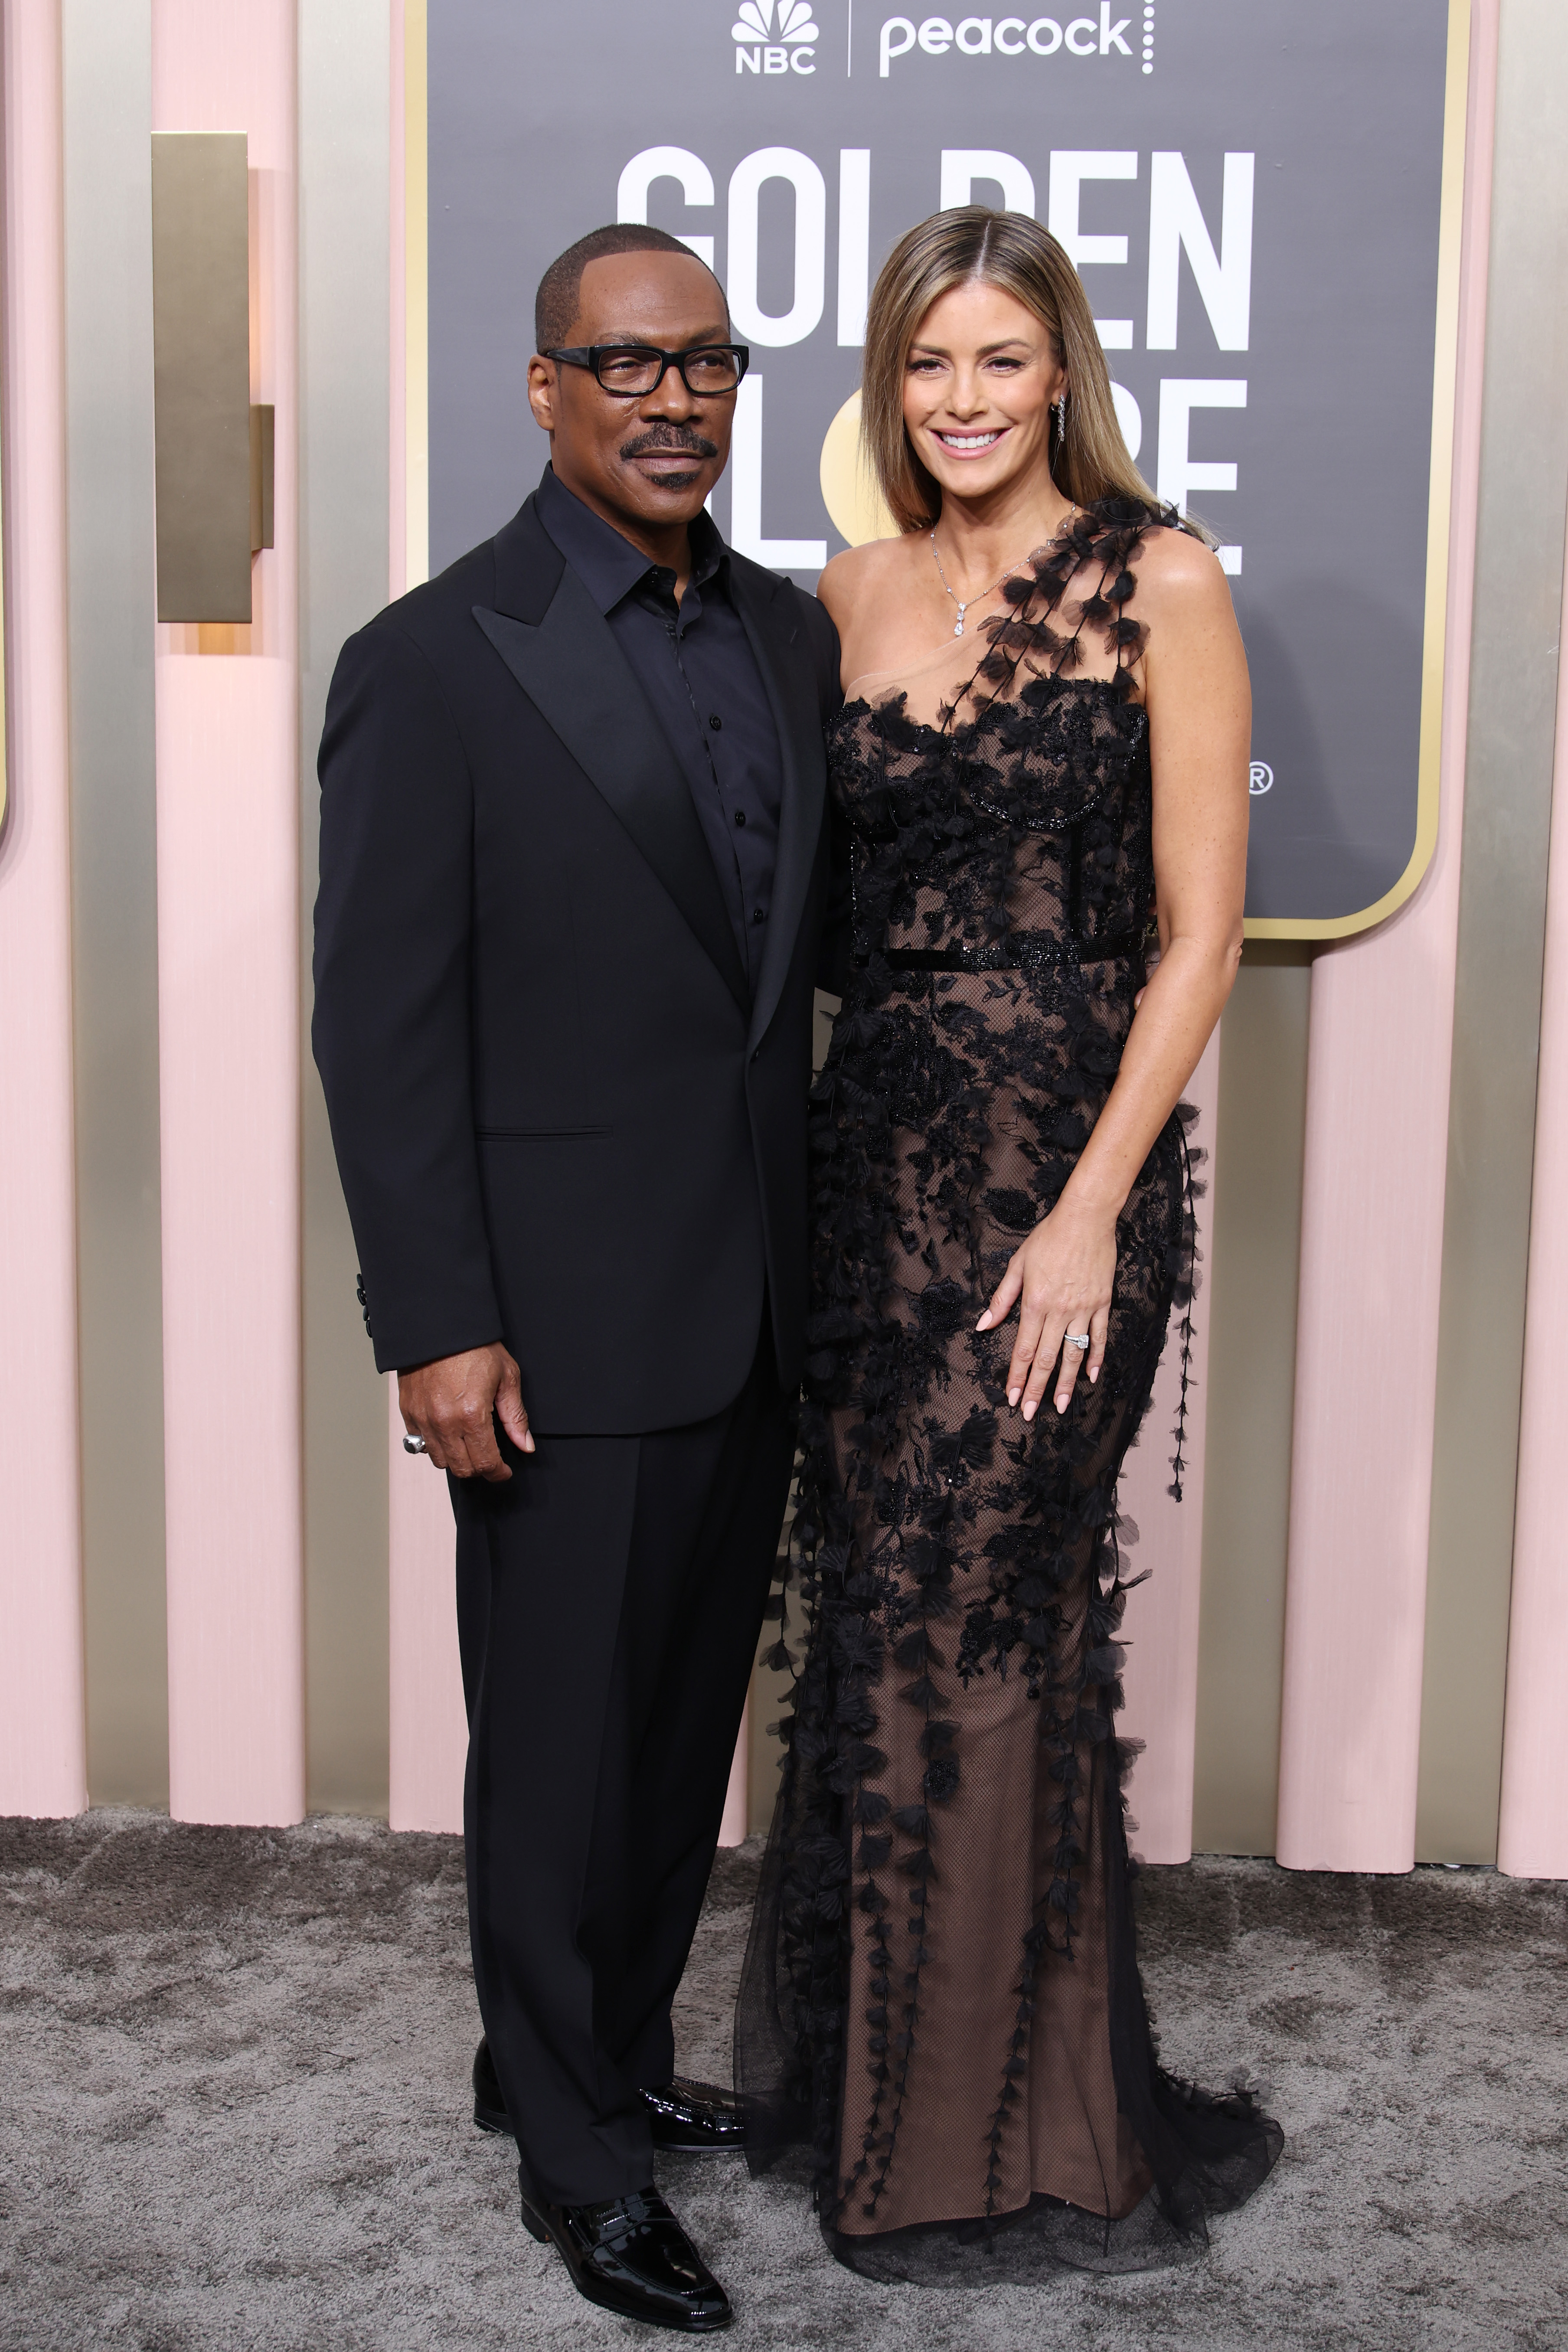 Paige Butcher is rarely seen or does interviews, but she told Extra on the Golden Globes red carpet in 2020 that Eddie is always saying sweet things to her